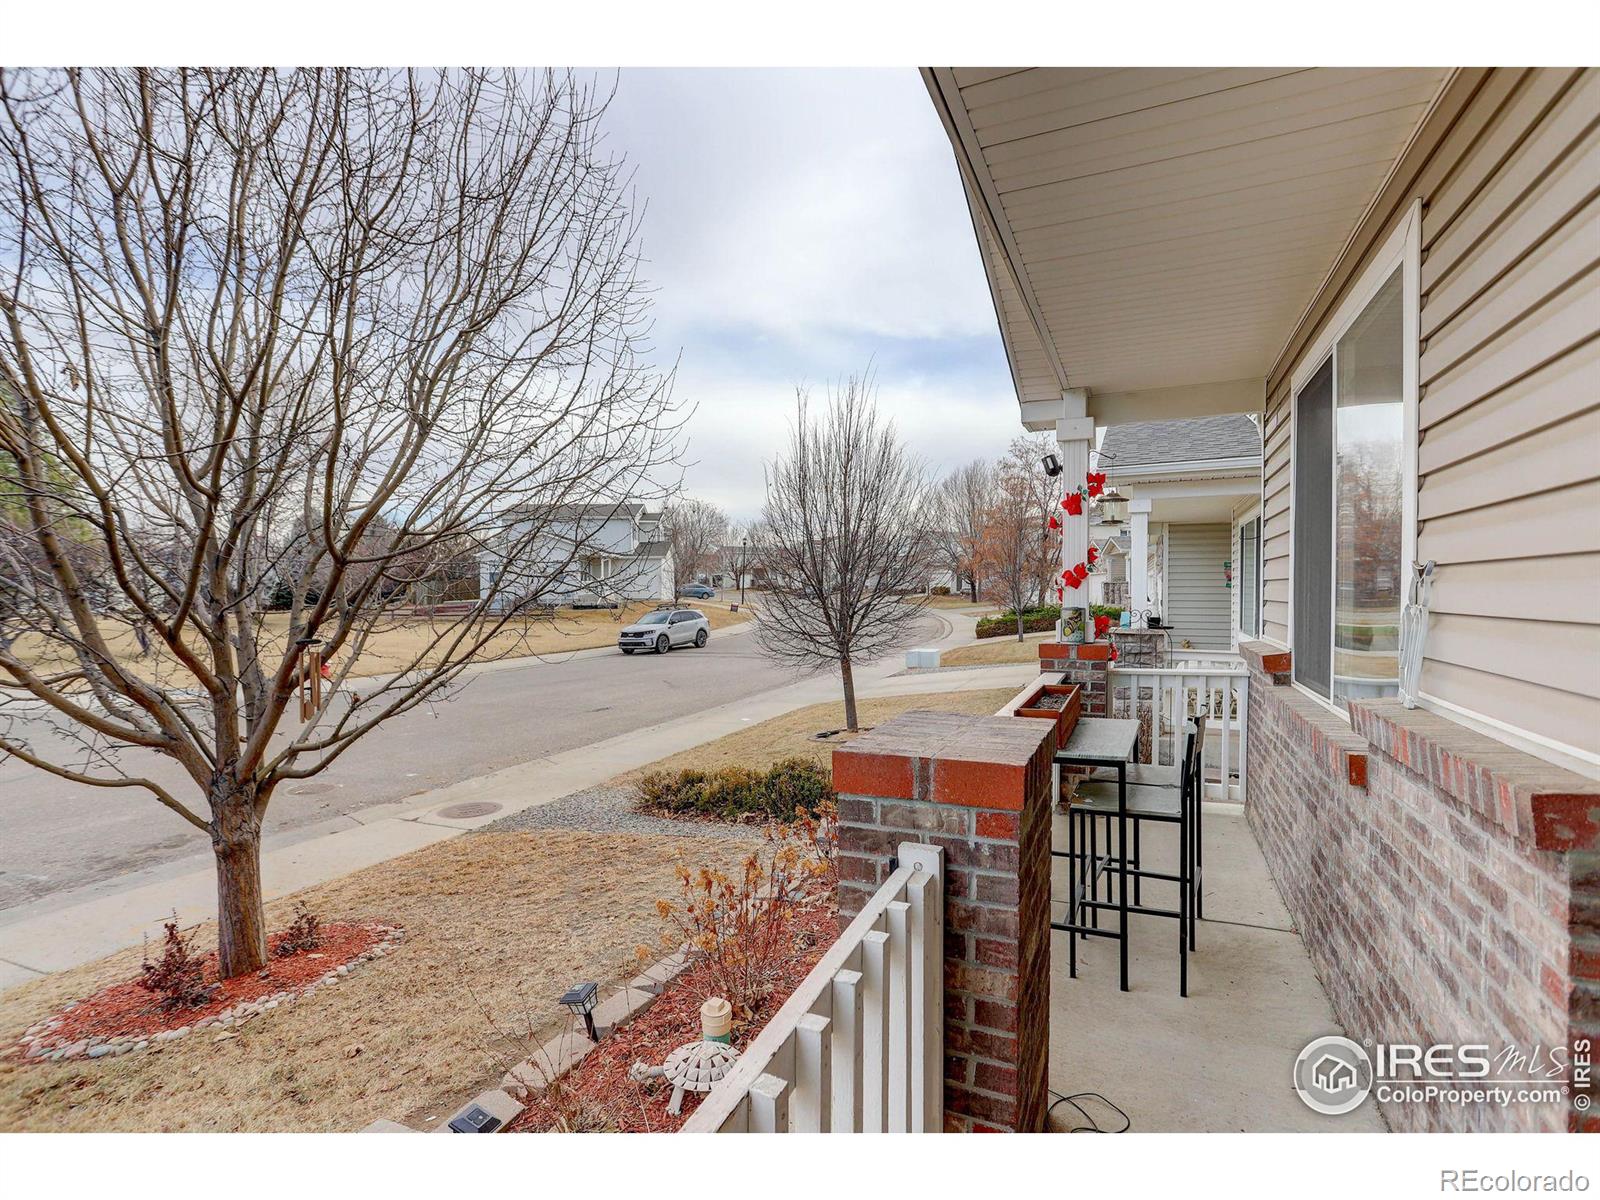 1205  trail ridge road, Longmont sold home. Closed on 2024-03-18 for $510,000.